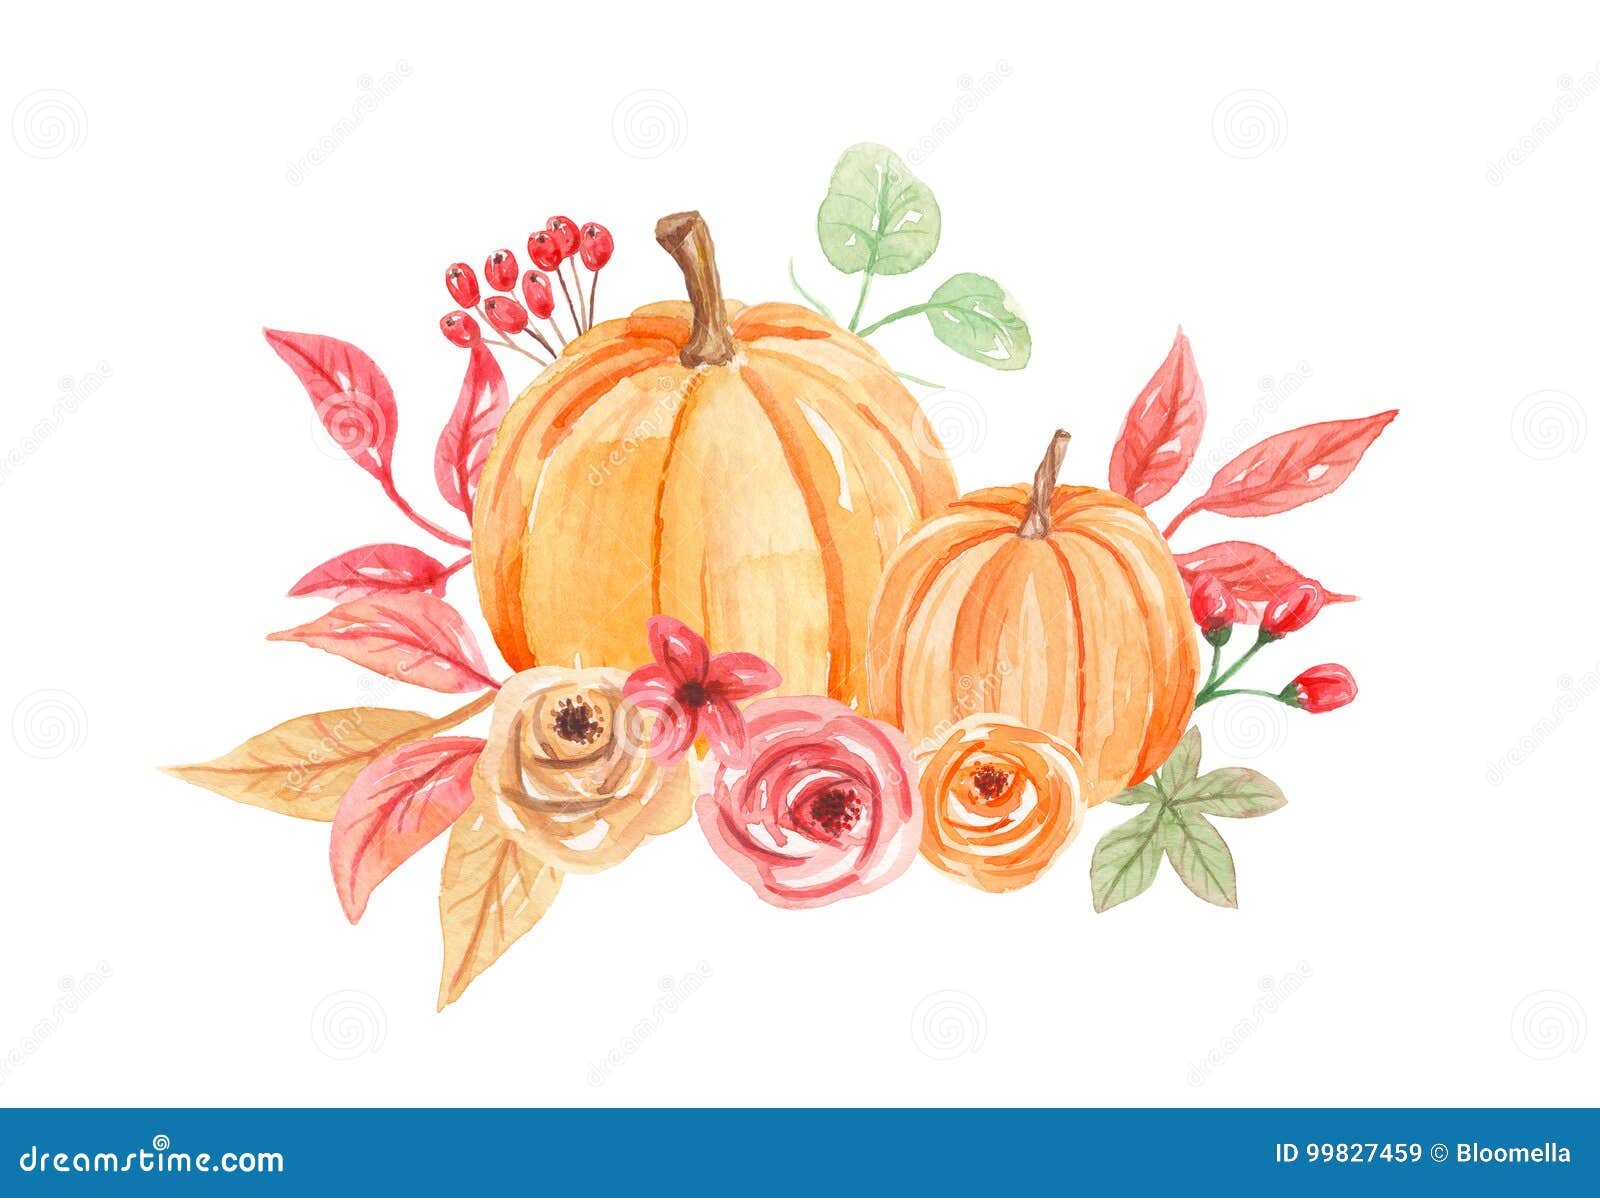 Watercolor Fall Clipart Stock Illustrations – 1,829 Watercolor Fall Clipart Stock Illustrations, Vectors & Clipart - Dreamstime